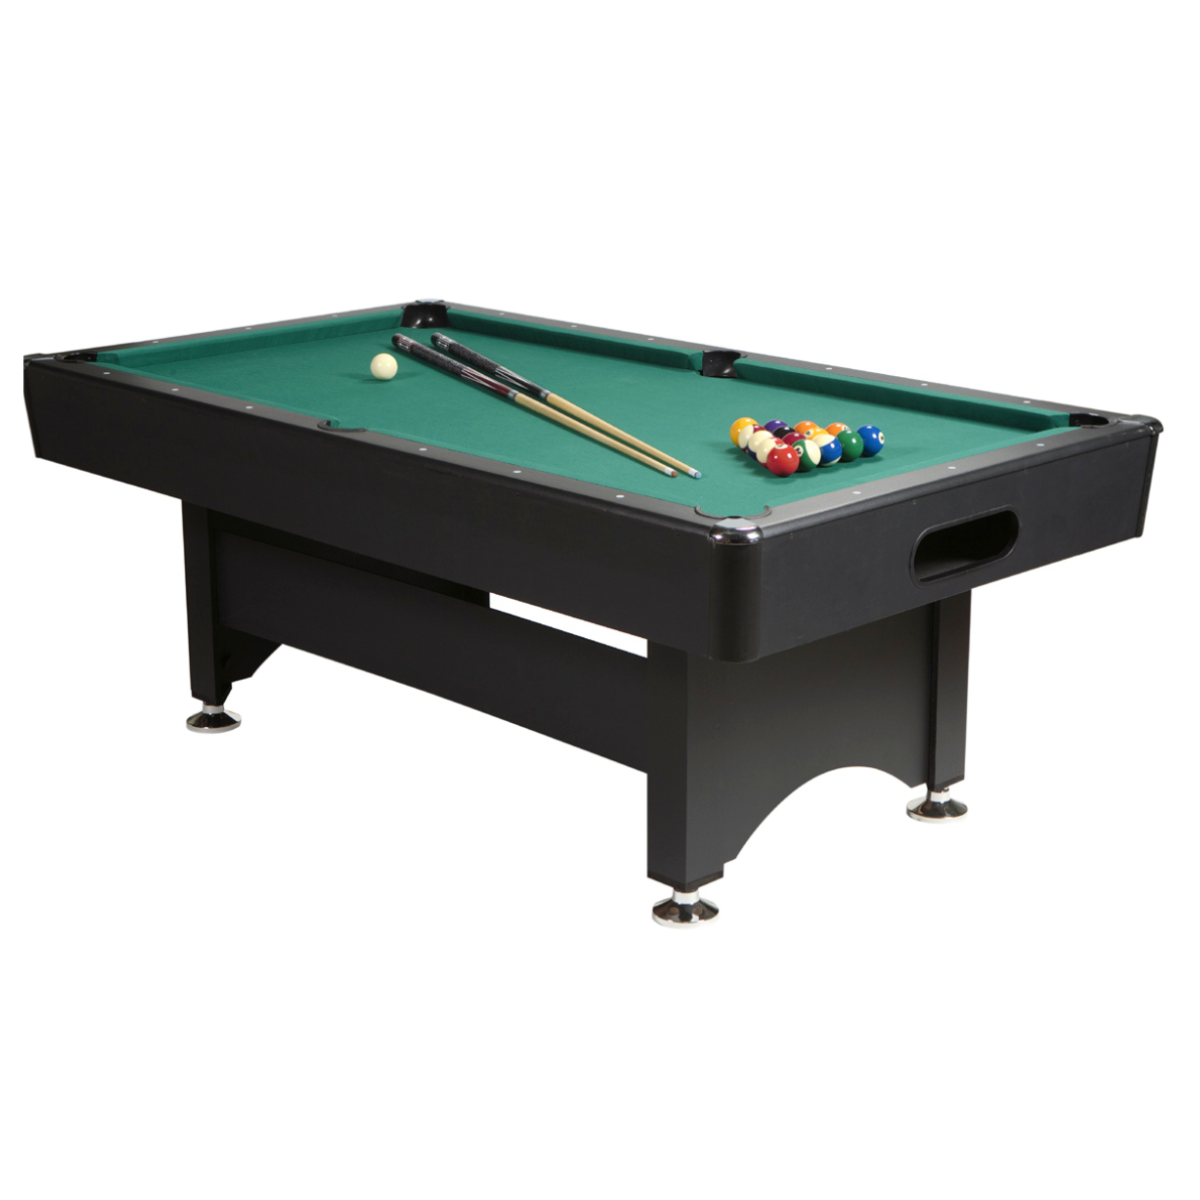 The Harvard 6ft & 7ft American Pool Table